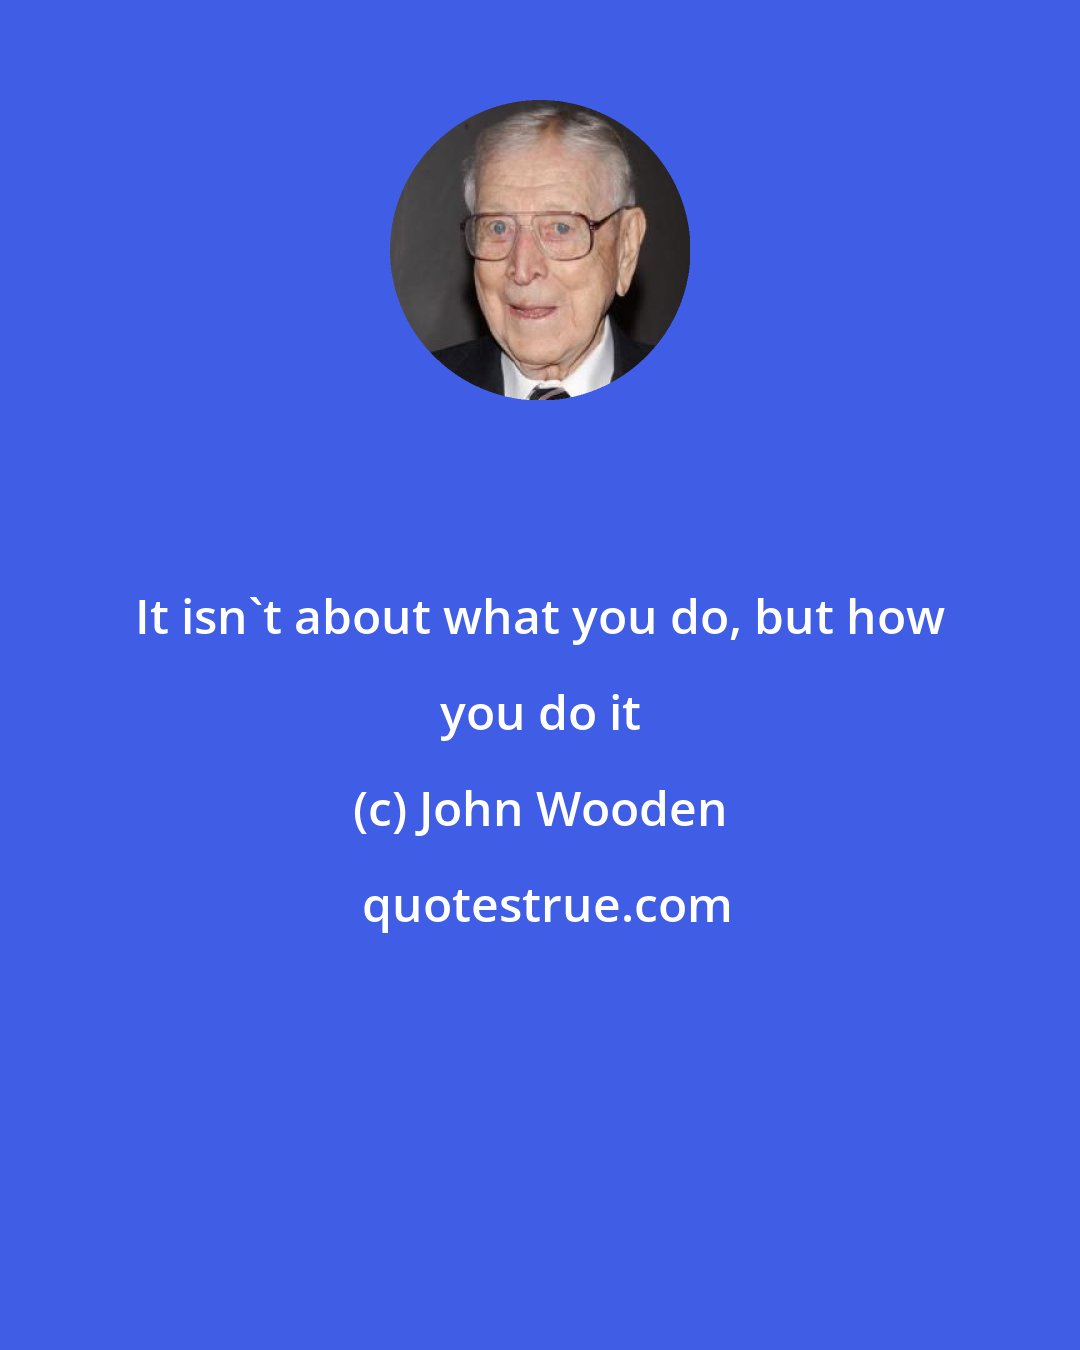 John Wooden: It isn't about what you do, but how you do it